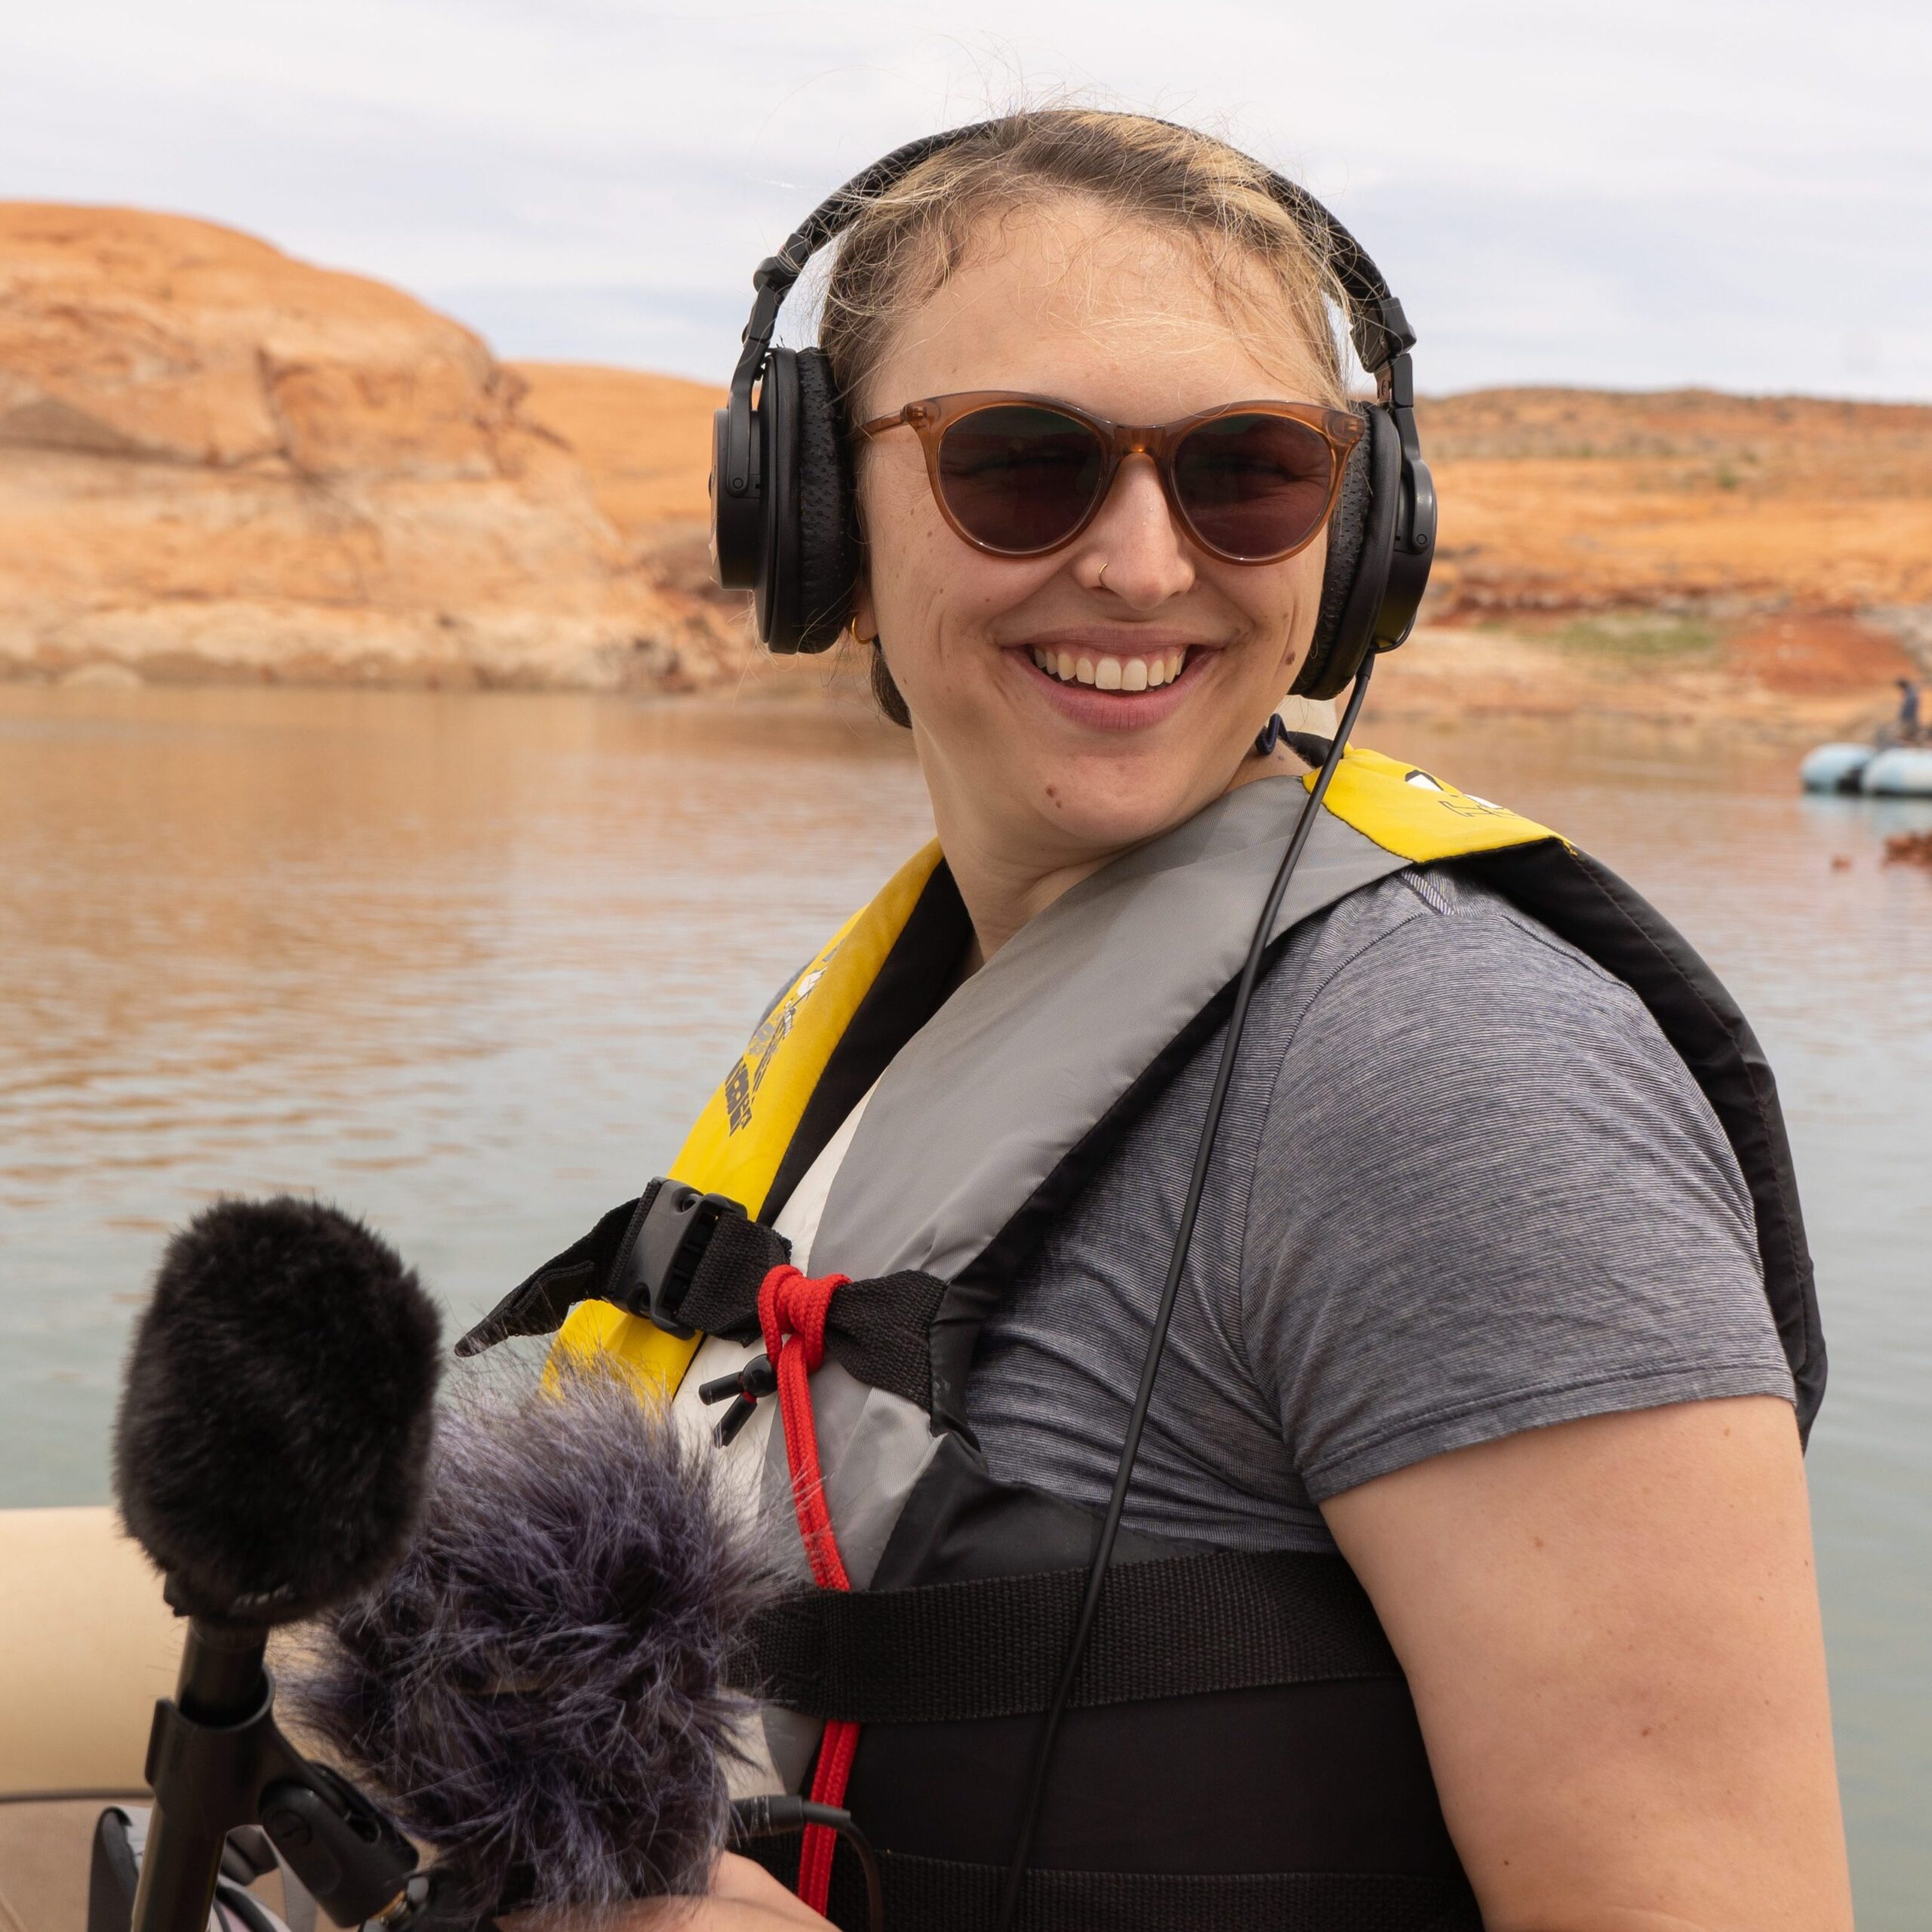 a woman with short, light-colored hair smiles with a microphone and a pair of headphones. The woman is white and the background is a river with red rocks on the banks.